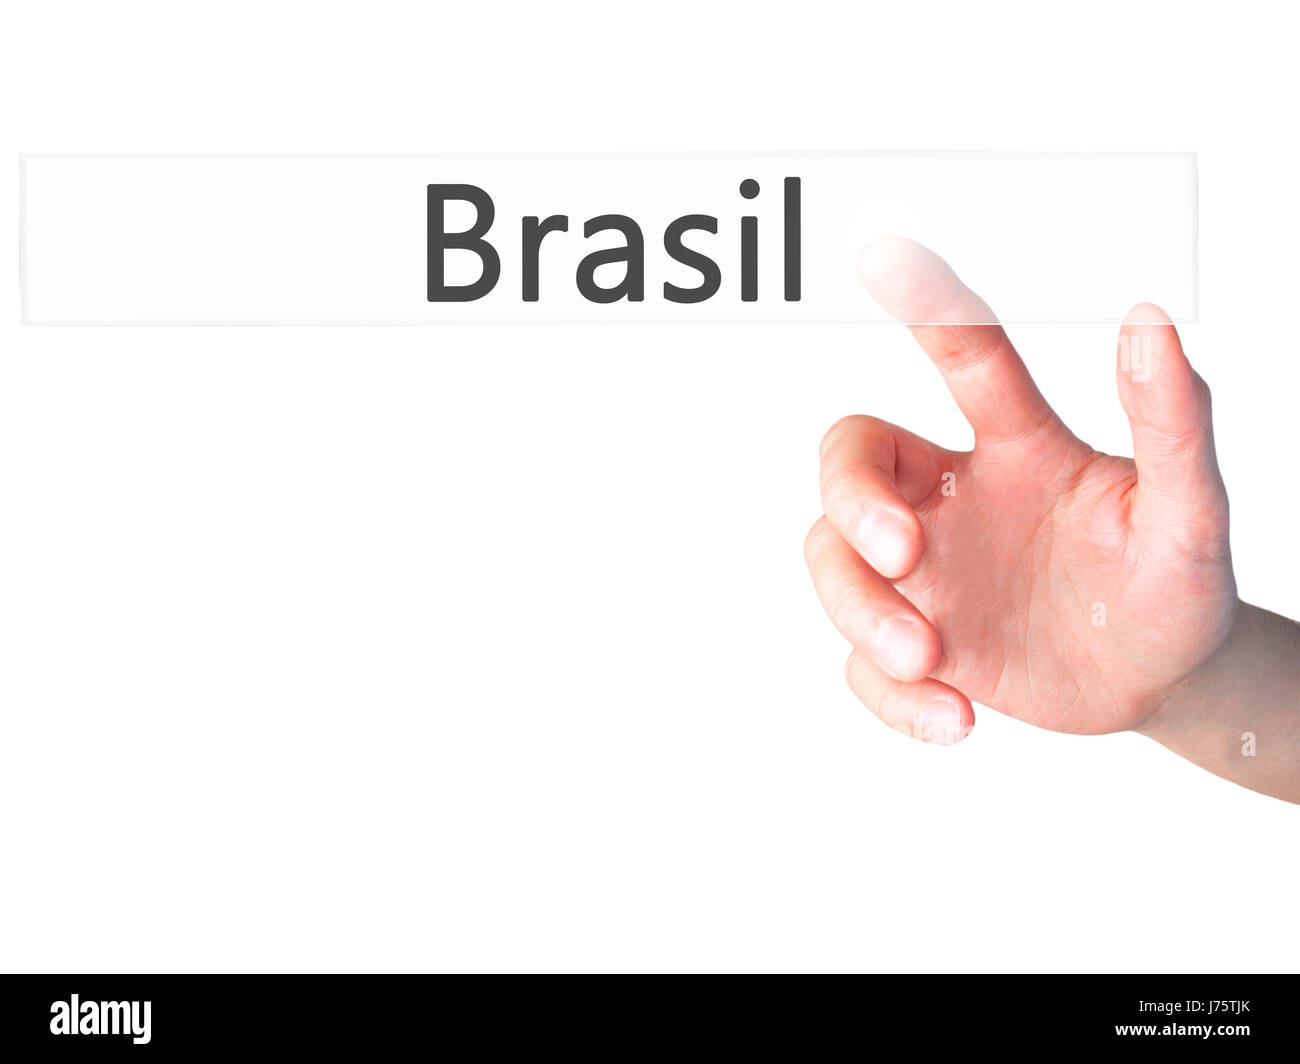 Brasil - Hand pressing a button on blurred background concept . Business, technology, internet concept. Stock Photo Stock Photo